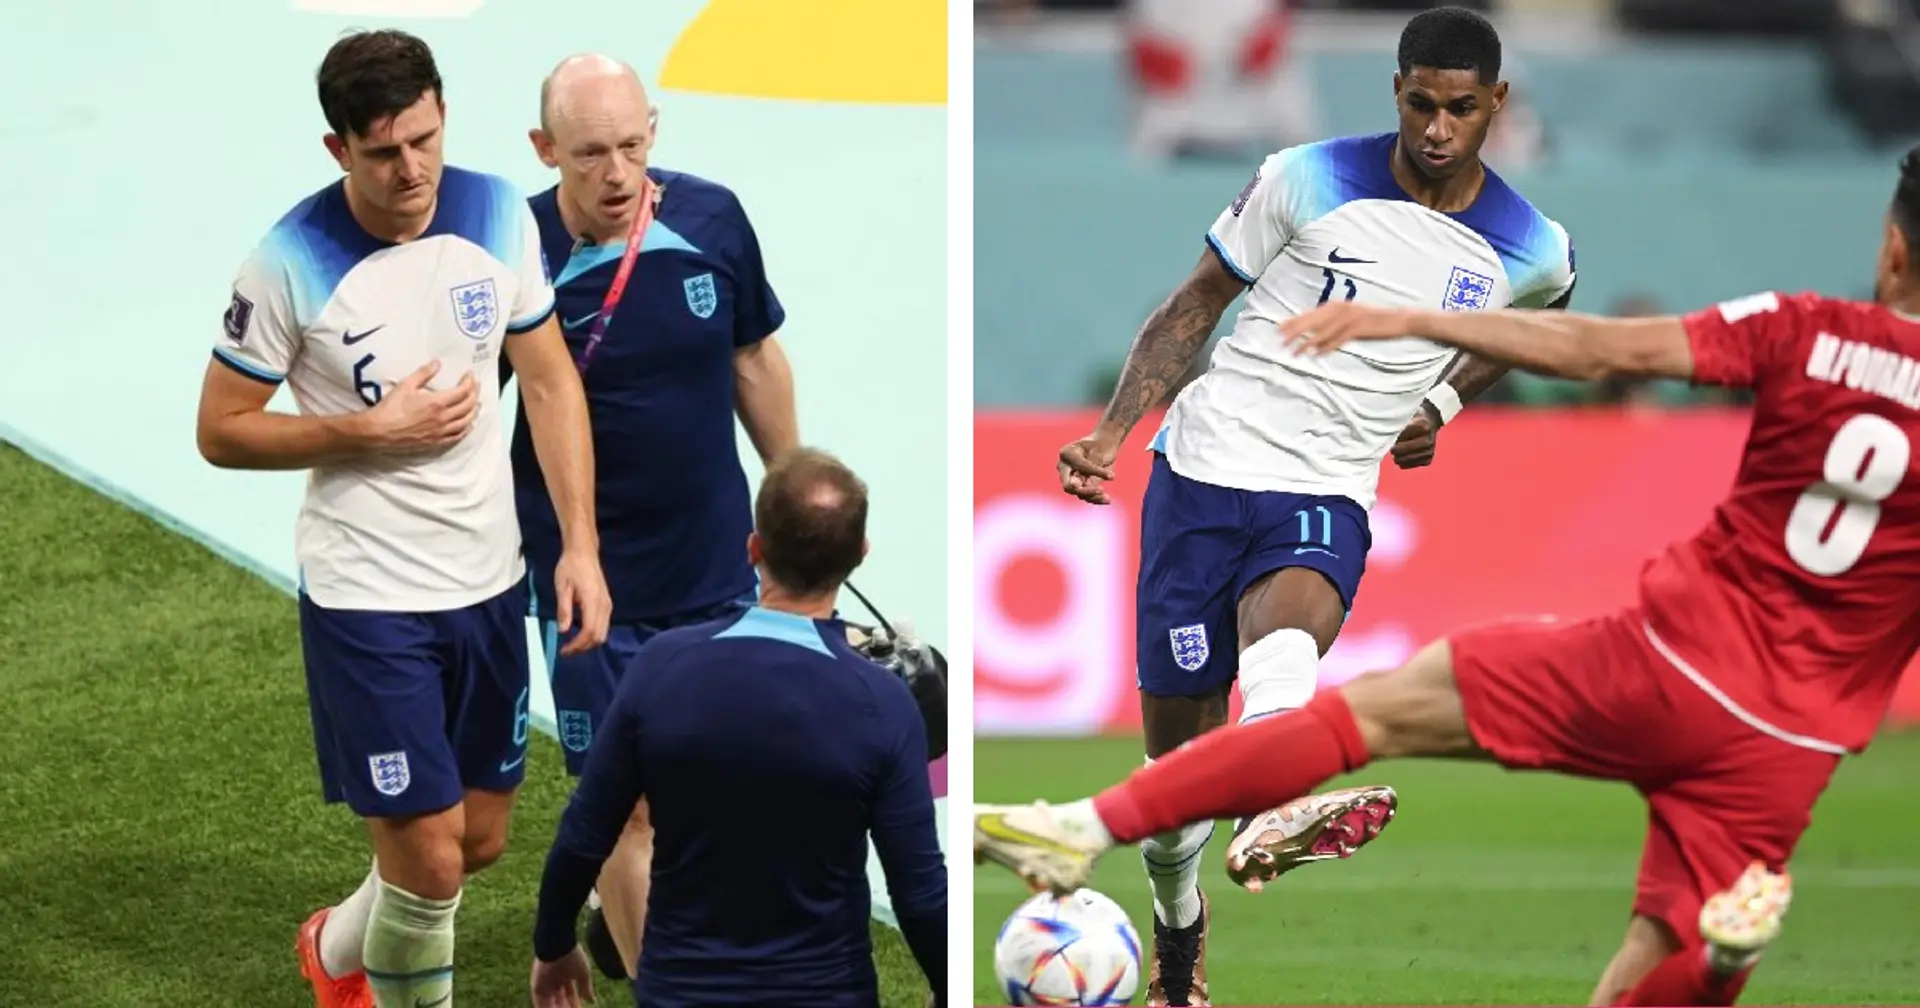 Maguire doubtful for England's next game and 2 more big Man United stories you might've missed